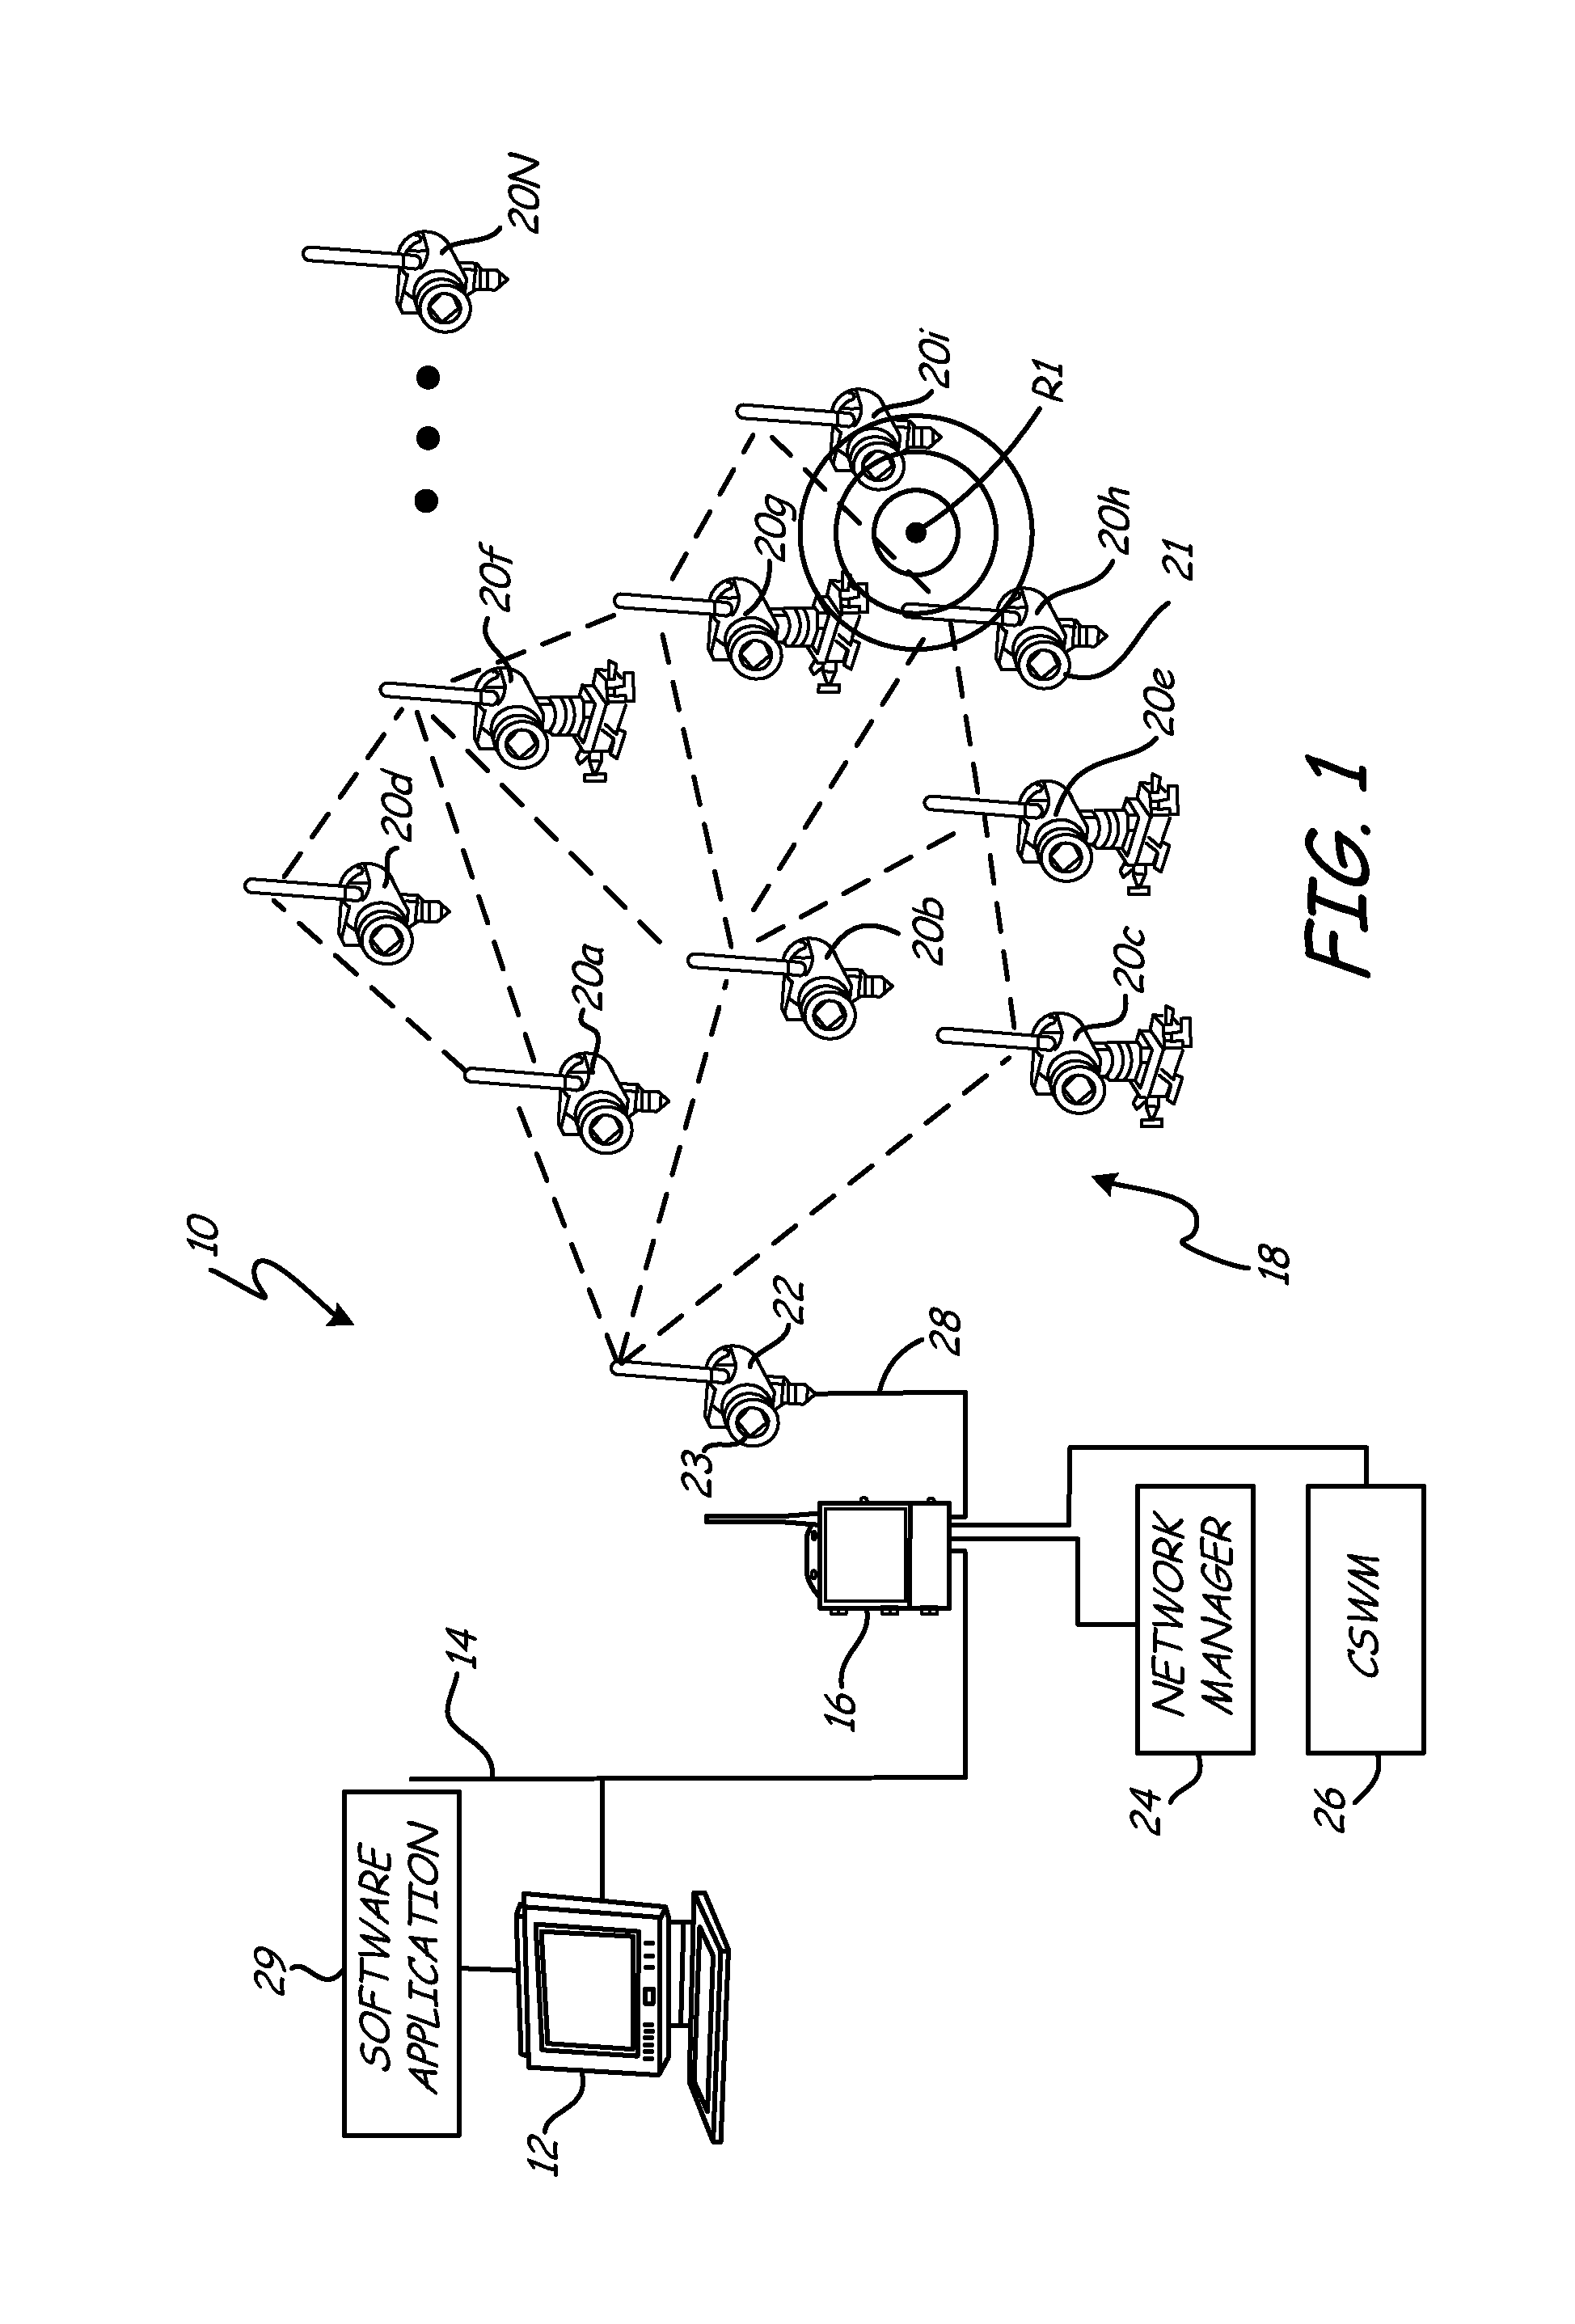 Wireless sensor network access point and device RF spectrum analysis system and method